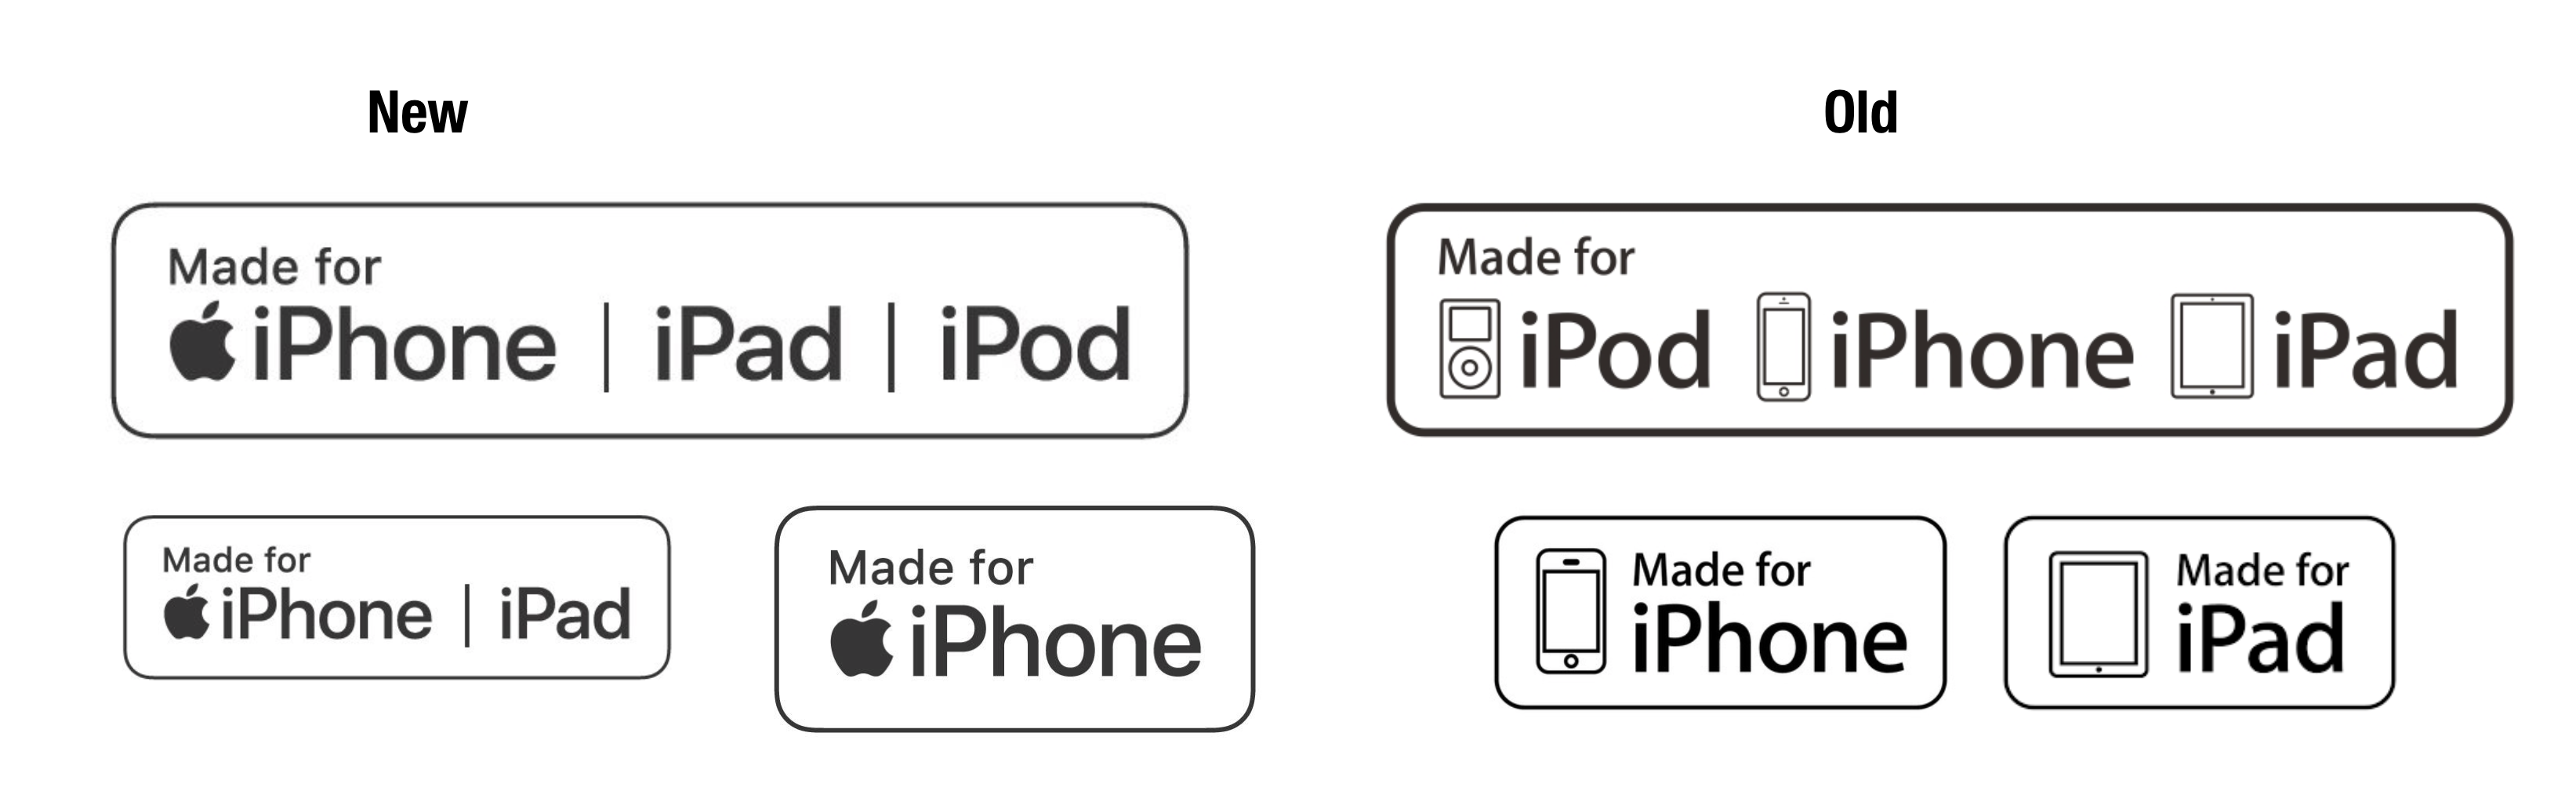 Apple updates its MadeforiPhone (MFi) branding for accessory makers